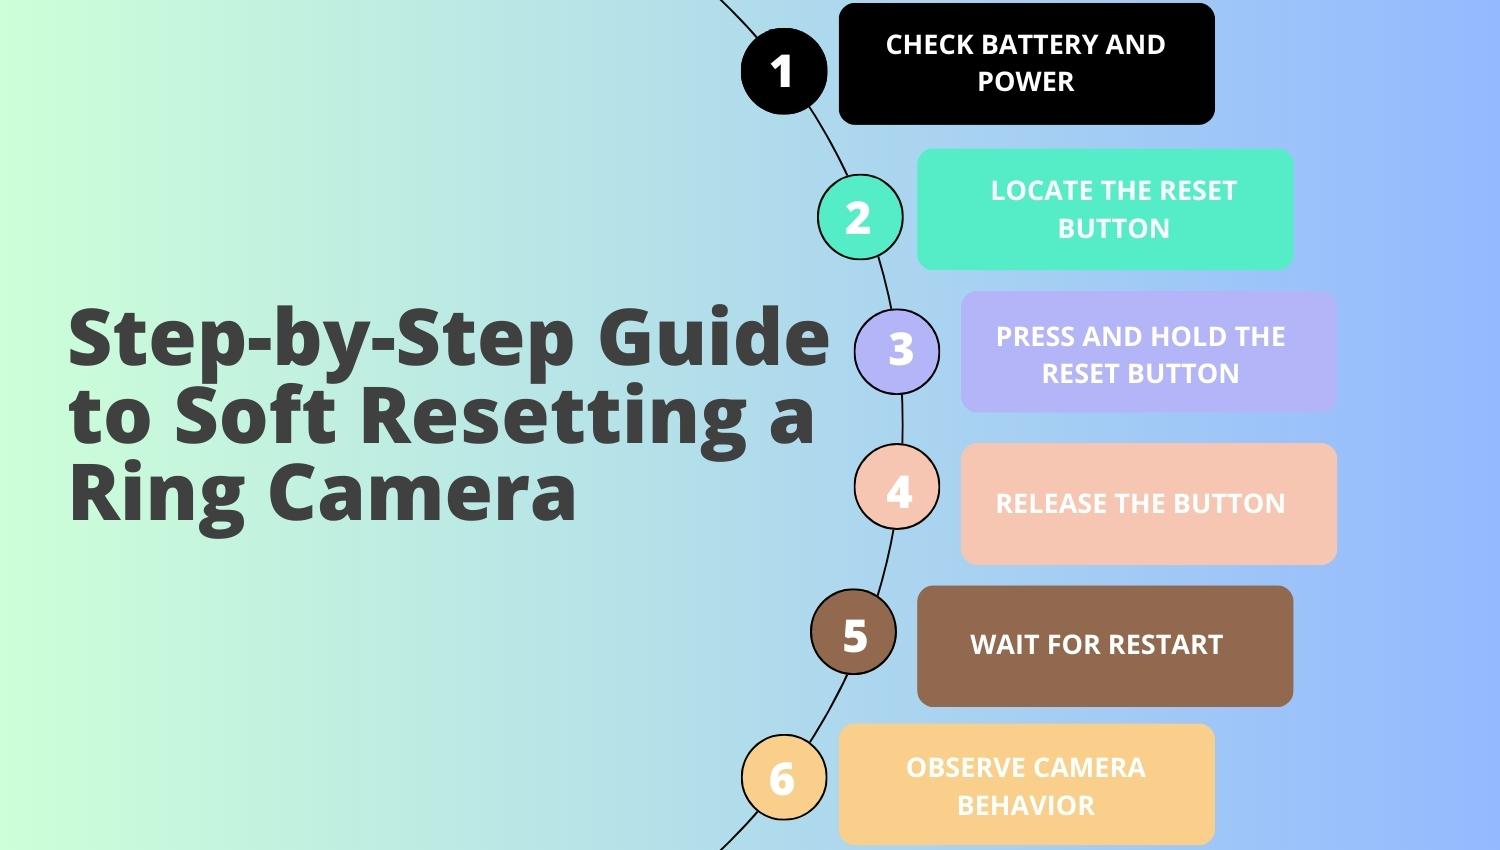 What is the Soft Resetting Procedure for Ring Camera